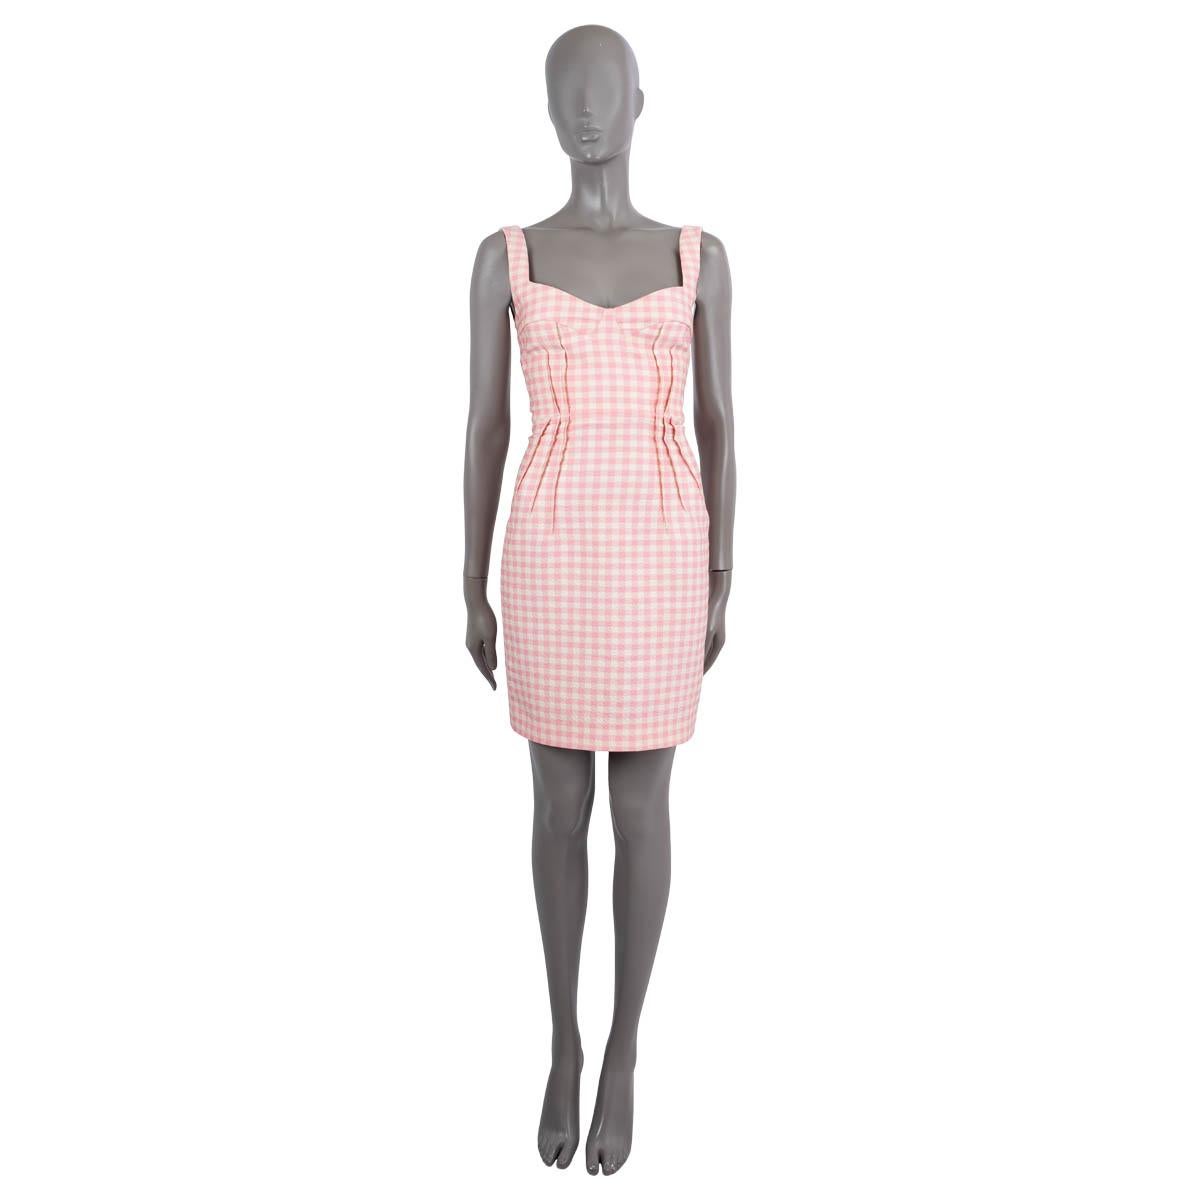 100% authentic Emilia Wickstead fitted seersucker gingham short dress in pink and off-white polyester (75%), polyamide (15%), silk (8%) and elastane (2%). Opens with a zipper on the back. Upper part is lined in white polyester (100%). Has been worn